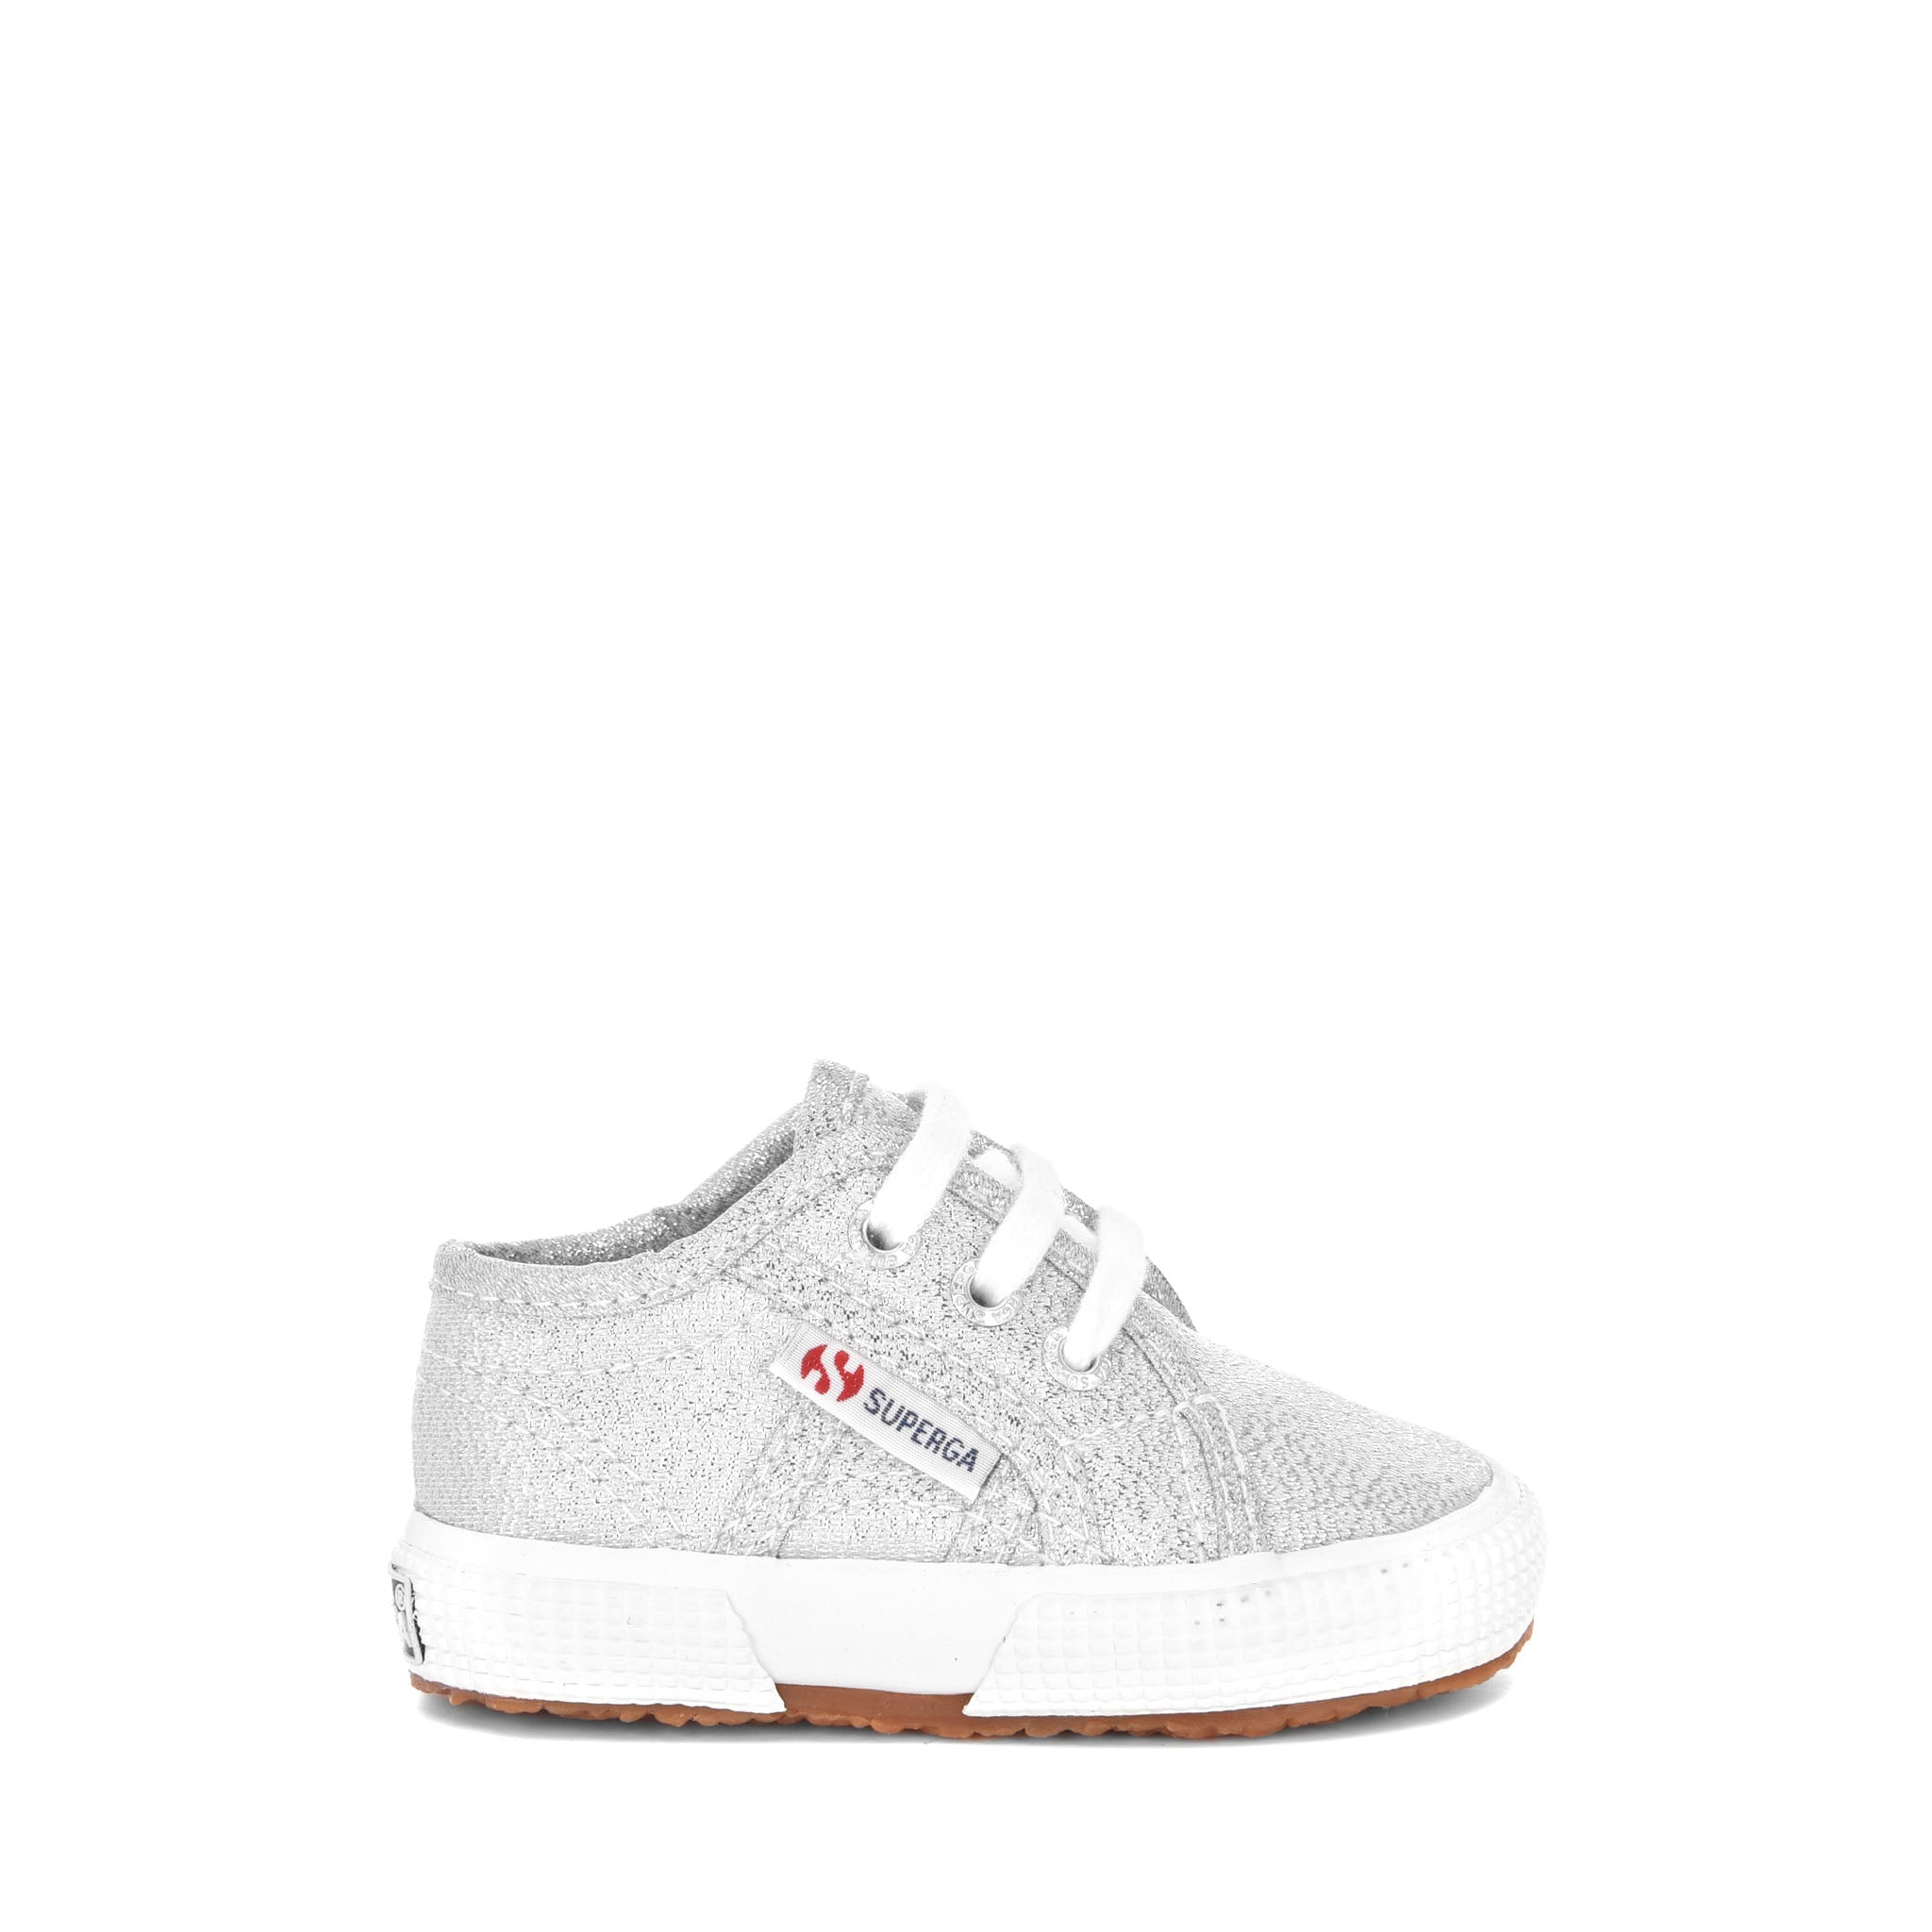 Superga 2750 Baby Lamé Sneakers - Grey Silver. Side view.